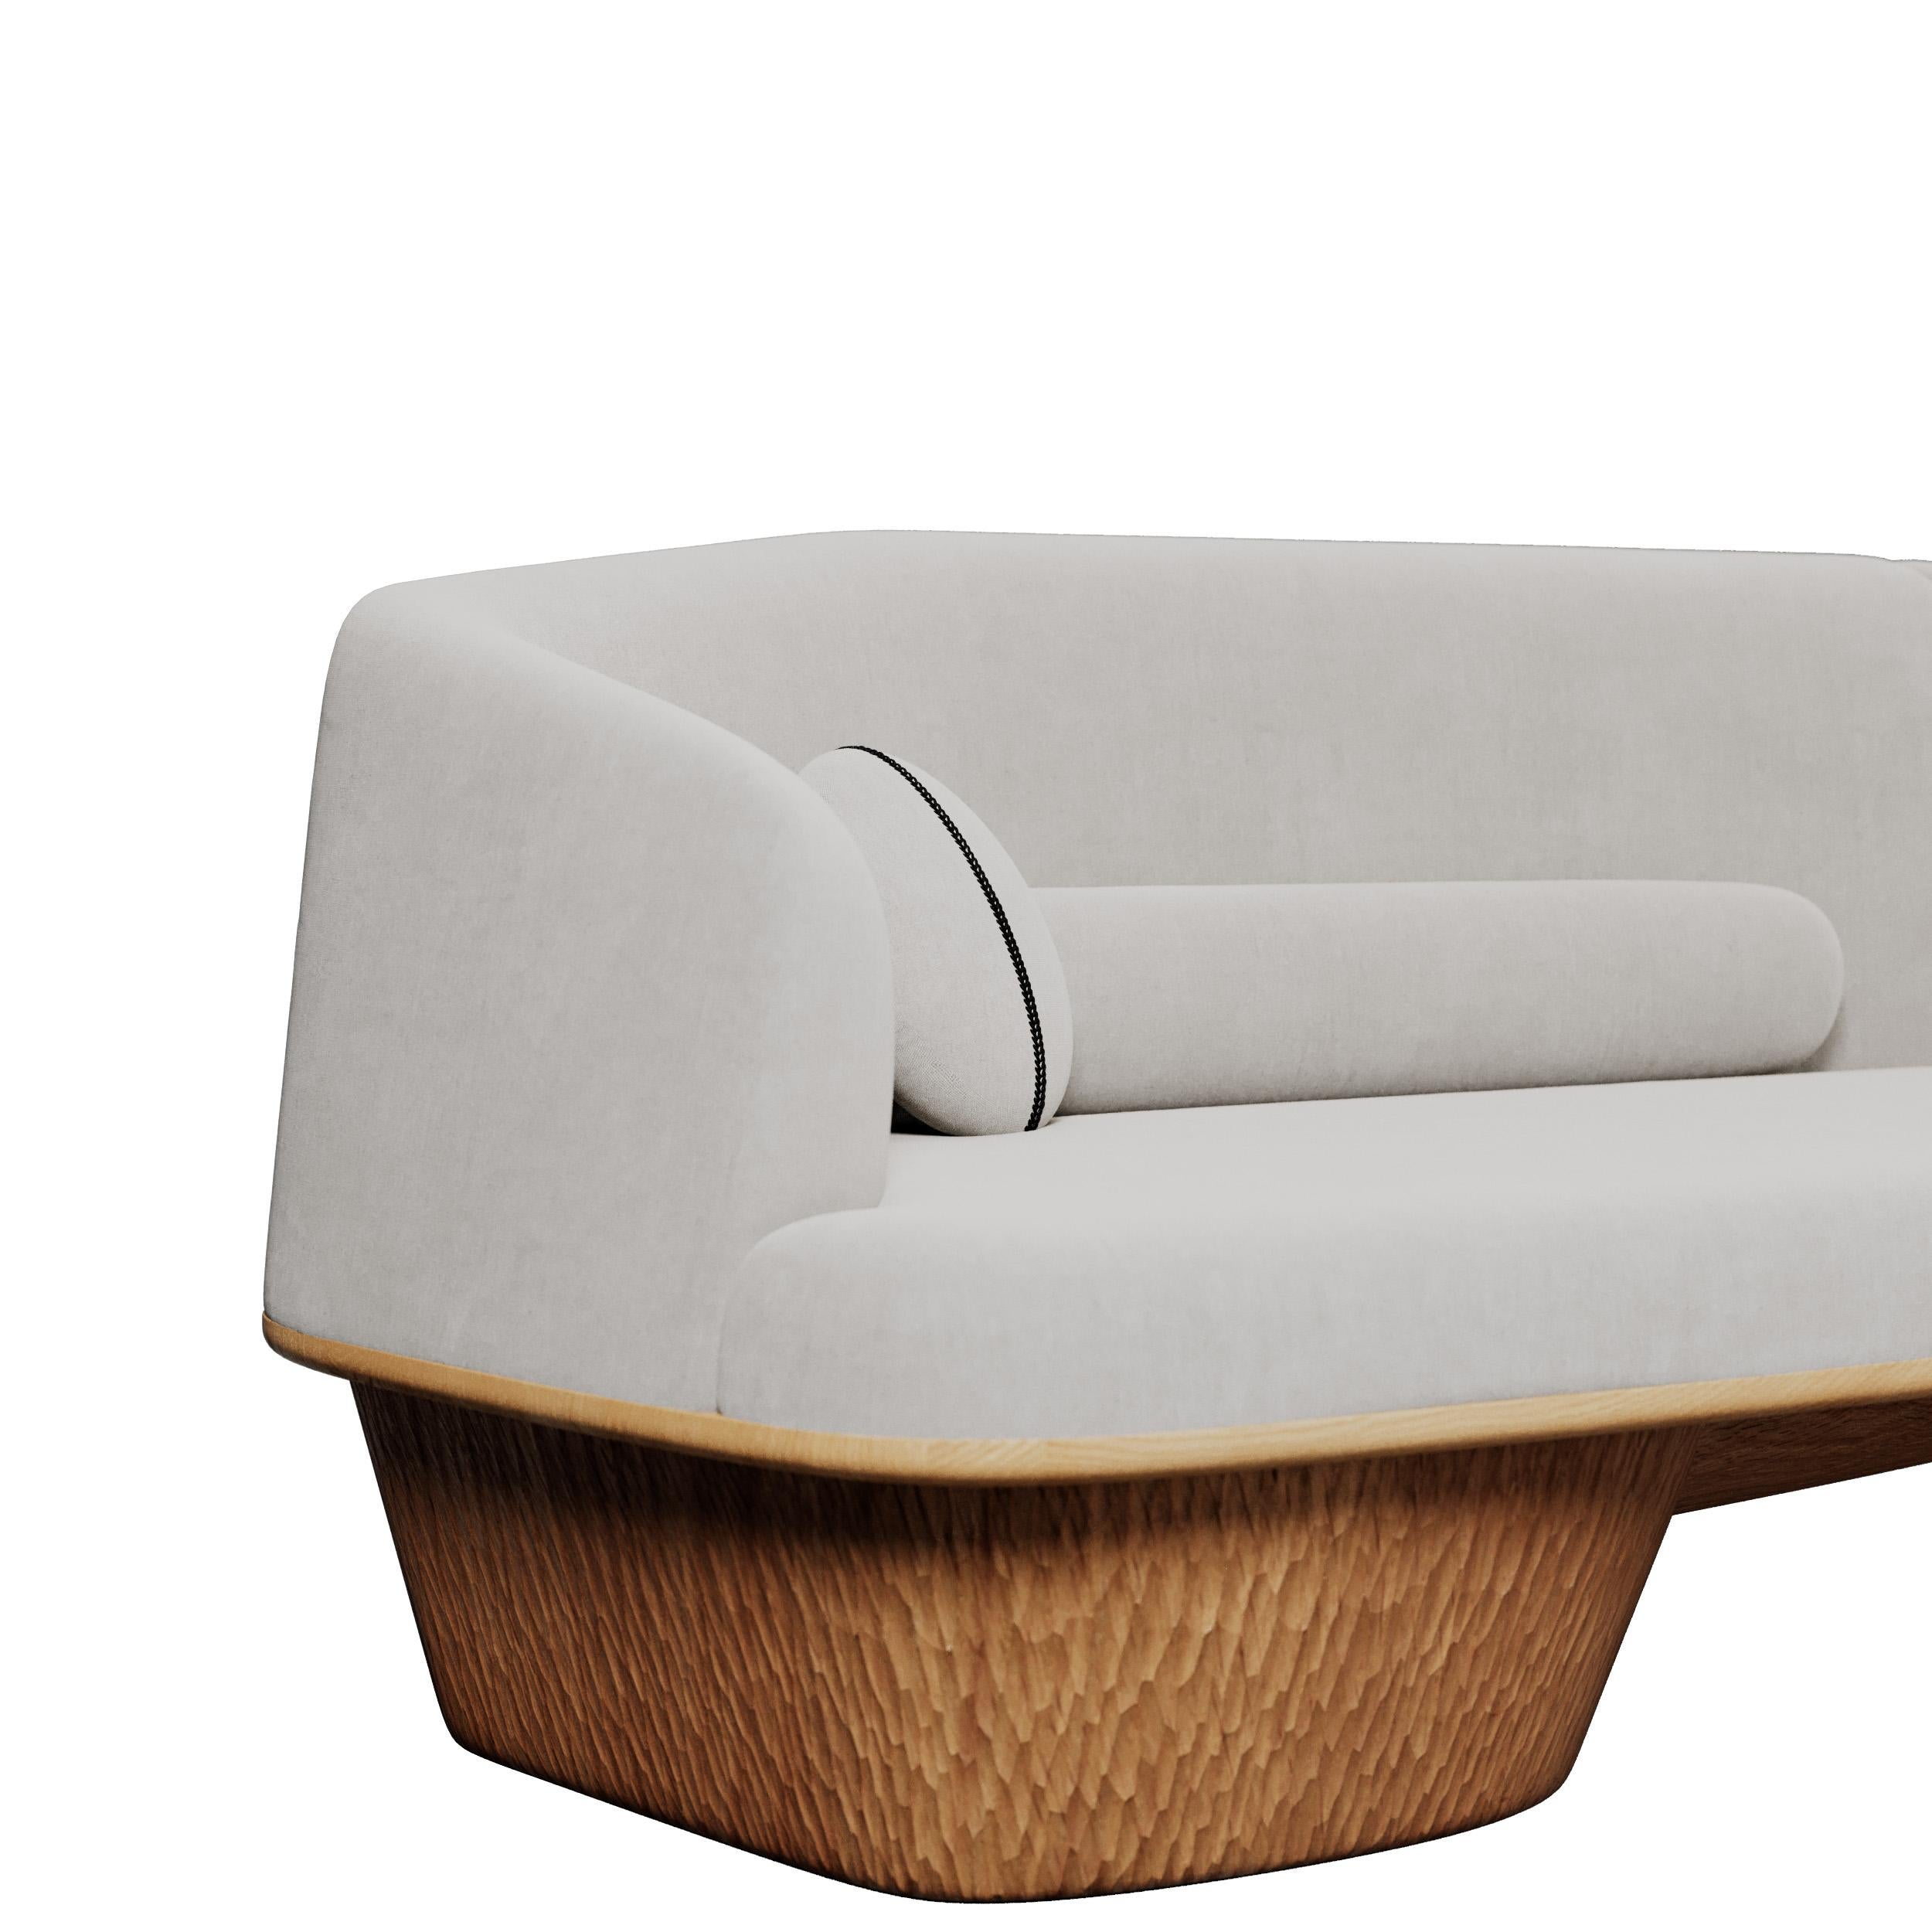 It is by the end of spring that Frédéric Imbert launches a new piece: the sofa Cypres. Designed and developed Paris ans Normandy with local wood ; a sofa with soft shapes and highlighted by a hand-carved base.

Cypress sofa takes its name from the